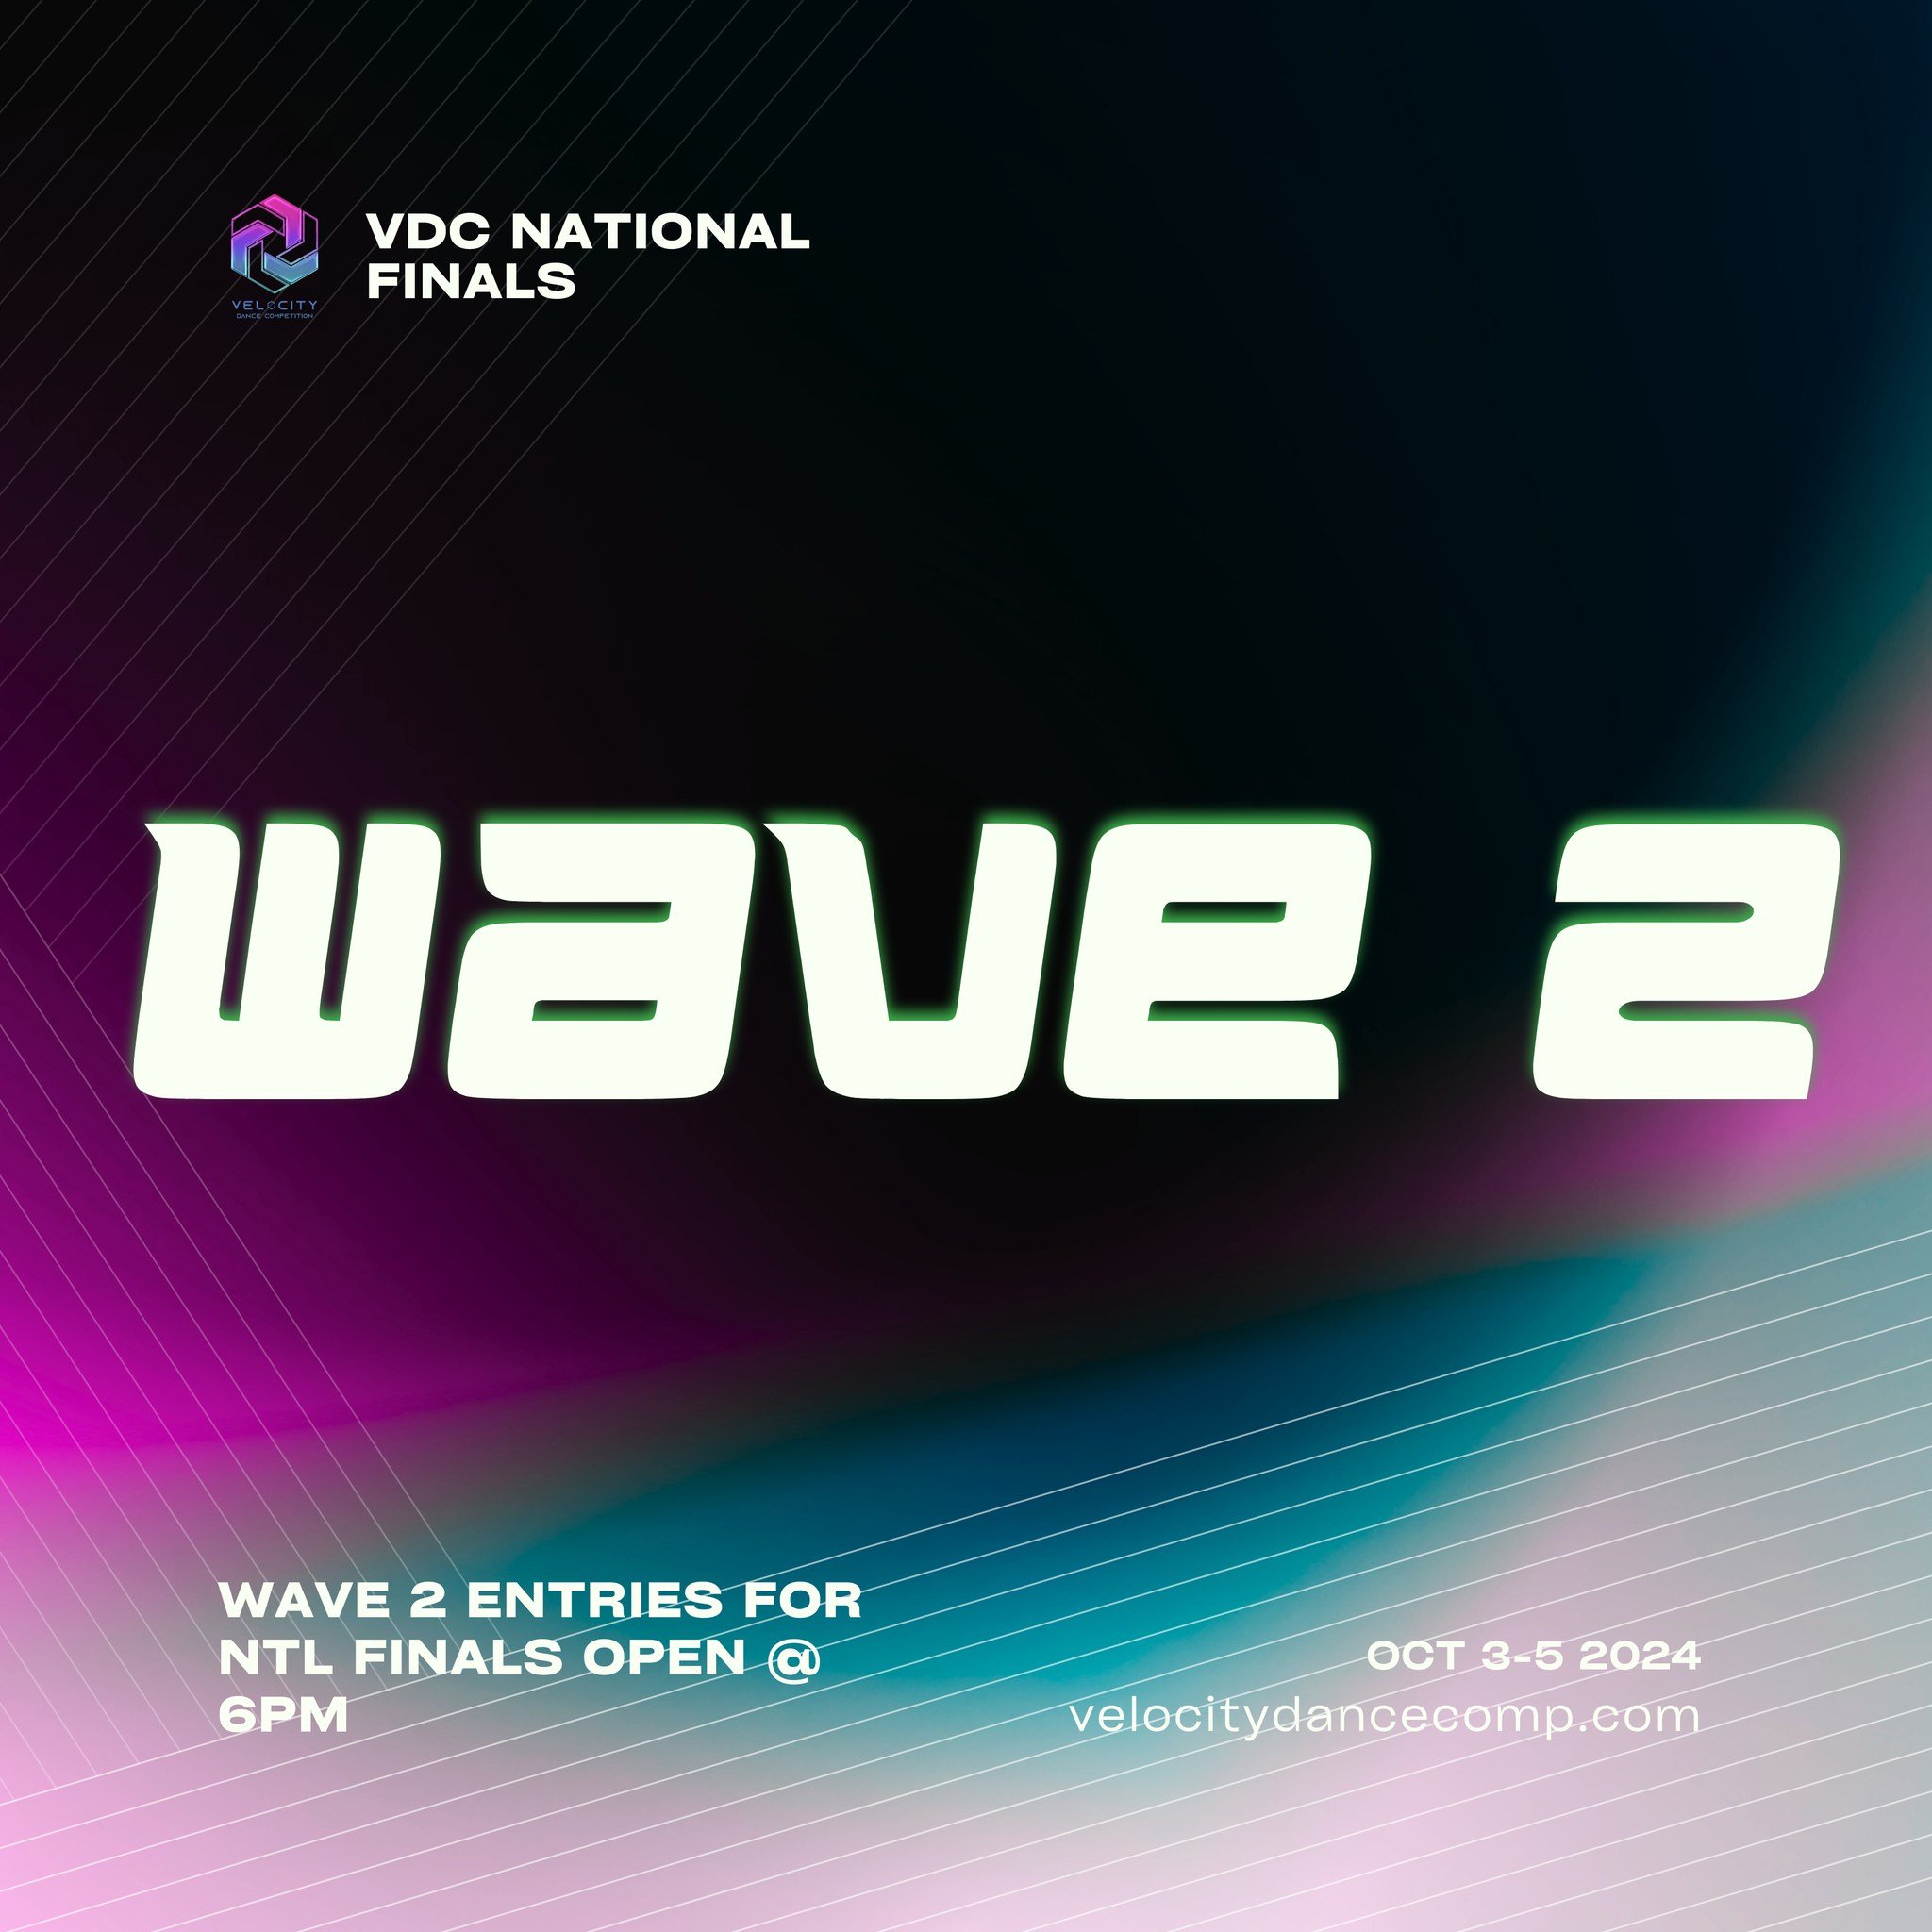 Wave 2 for National Finals entries are open NOW!

Head to www.velocitydancecomp.com and hit the button under NATIONAL FINALS to take you to the entry app, and we&rsquo;re sure you know where to go from there! Payment is not necessary straight away&he